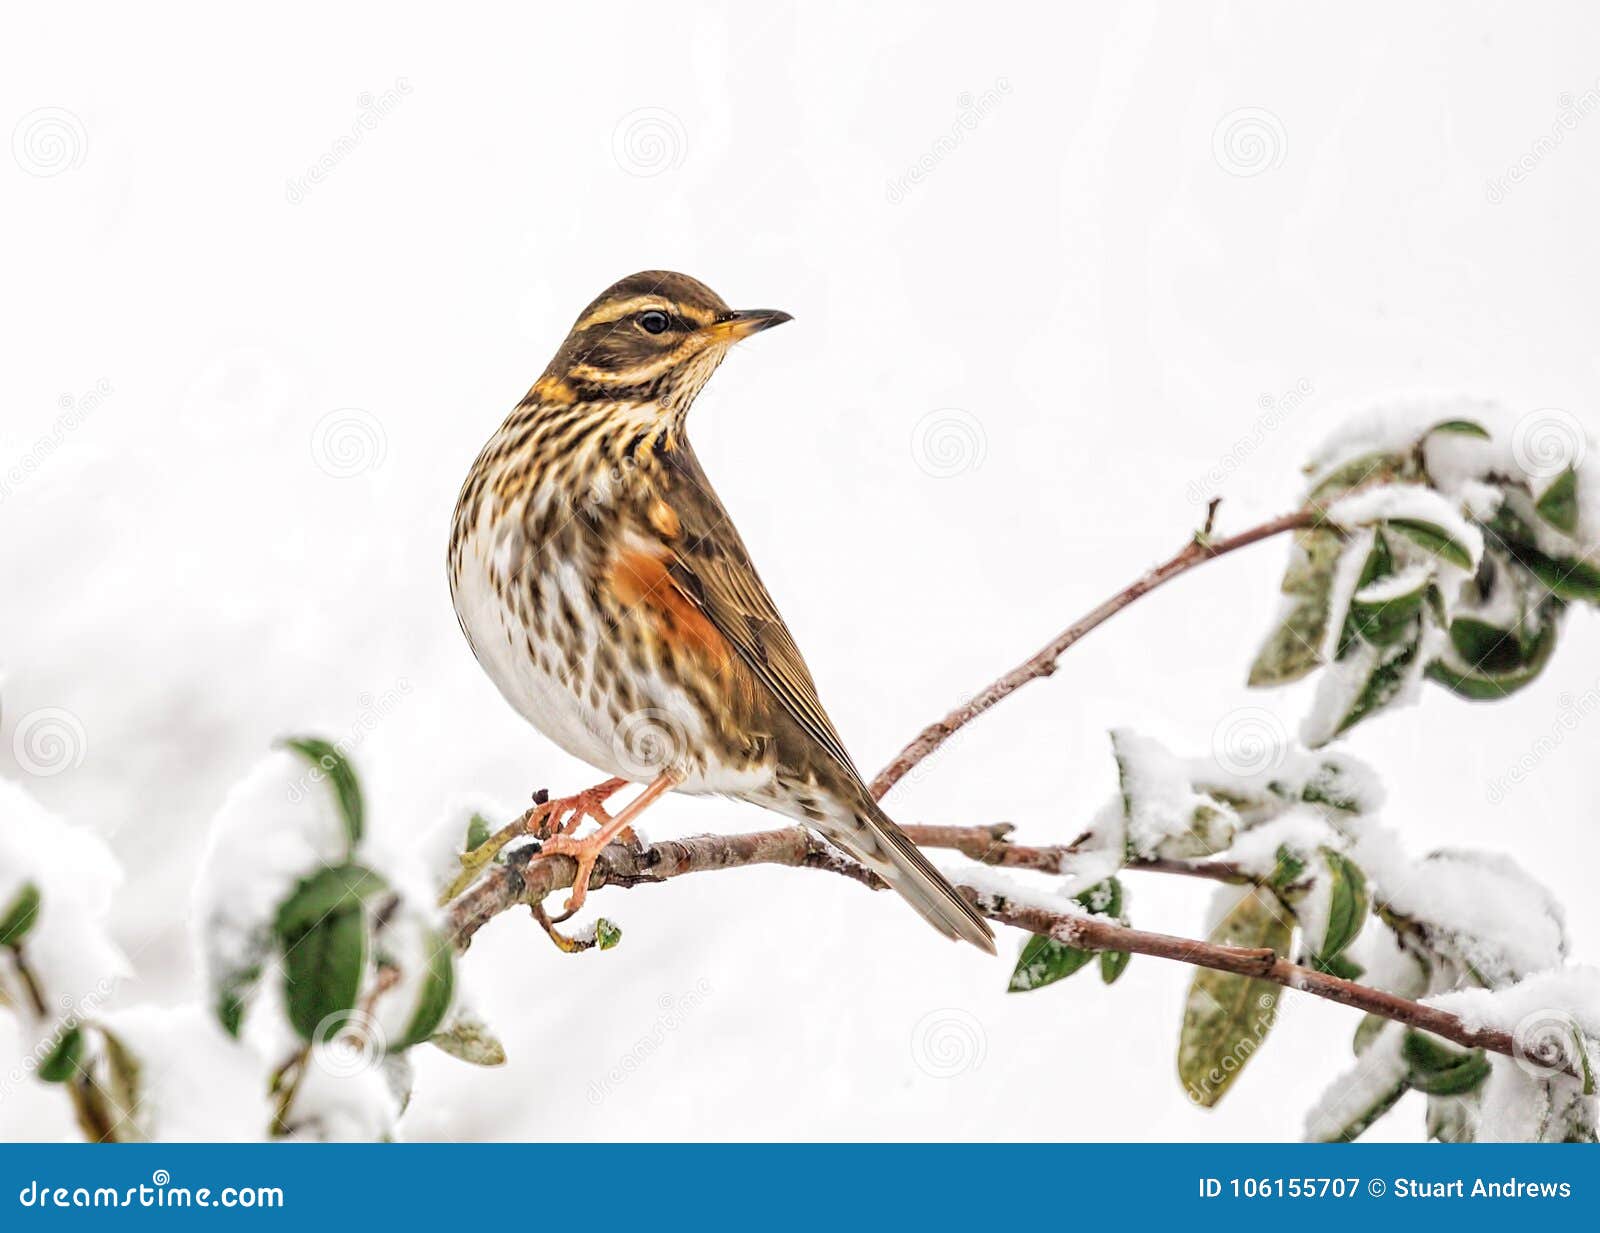 redwing - turdus iliacus resting in a a snow covered garden tree..